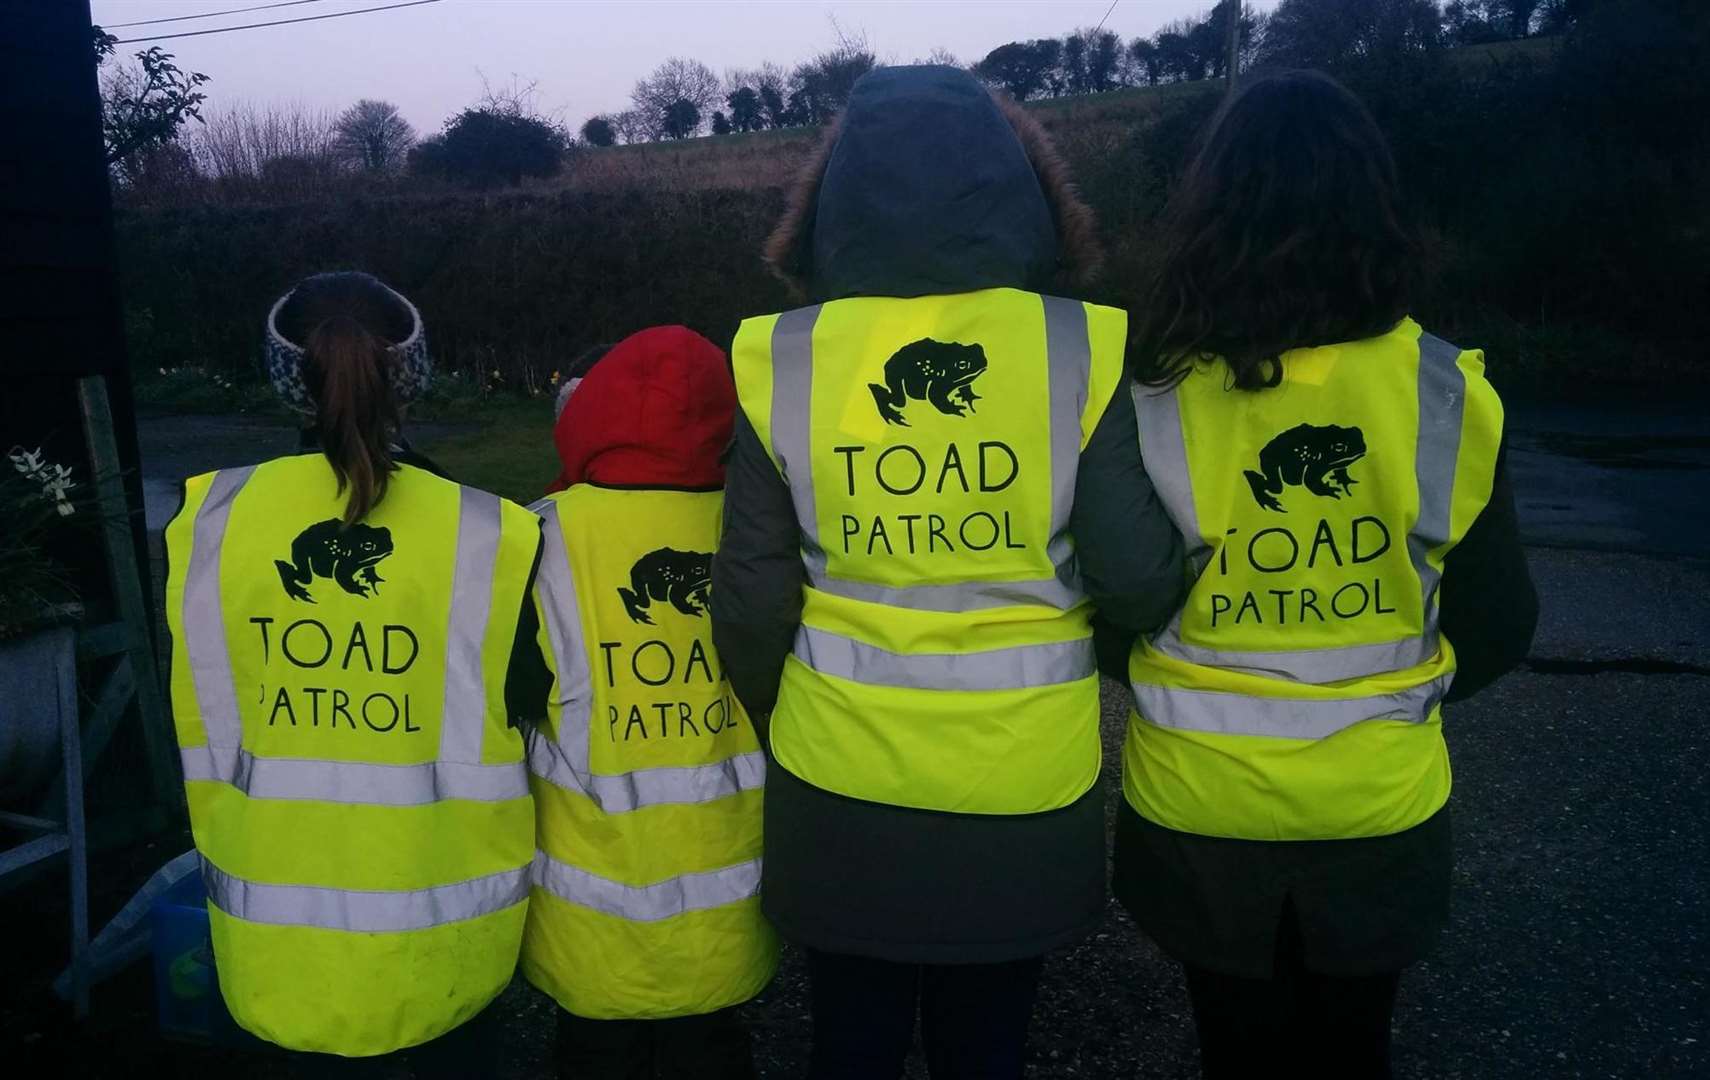 Toad patrollers Picture: Amy Wright